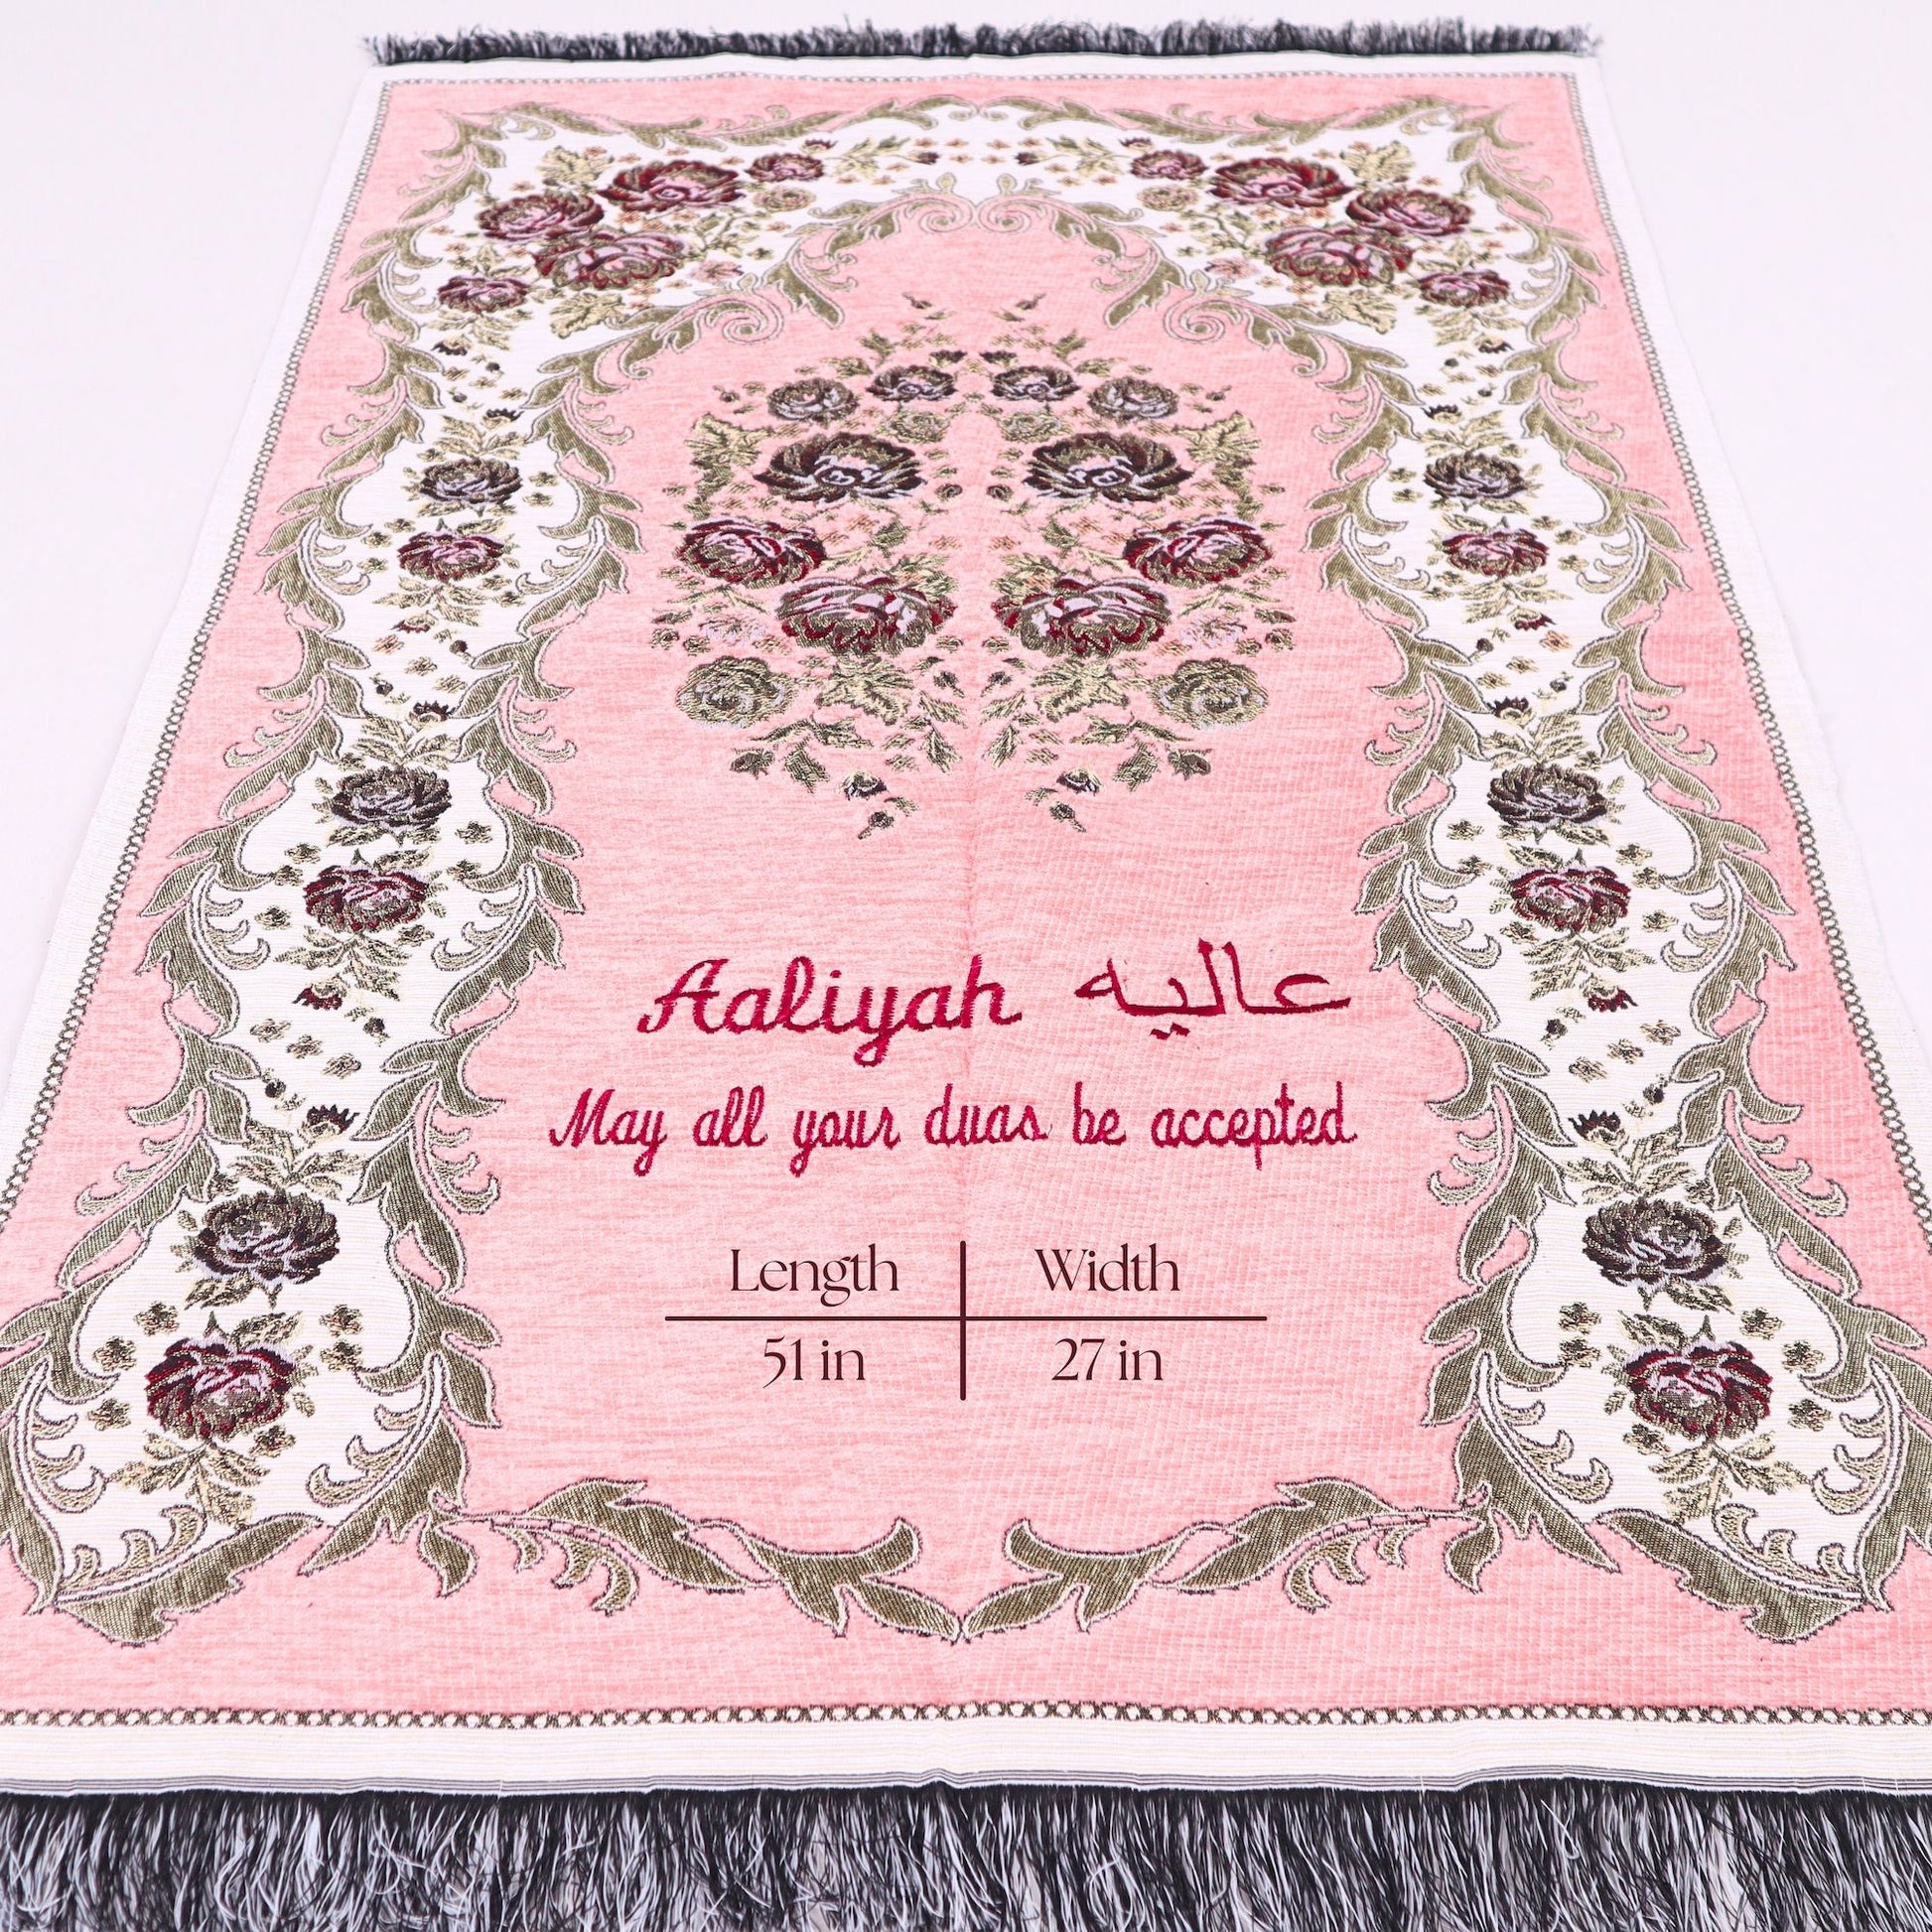 Personalized Woven Prayer Mat Quran Tasbeeh Islamic Muslim Gift Set - Islamic Elite Favors is a handmade gift shop offering a wide variety of unique and personalized gifts for all occasions. Whether you're looking for the perfect Ramadan, Eid, Hajj, wedding gift or something special for a birthday, baby shower or anniversary, we have something for everyone. High quality, made with love.